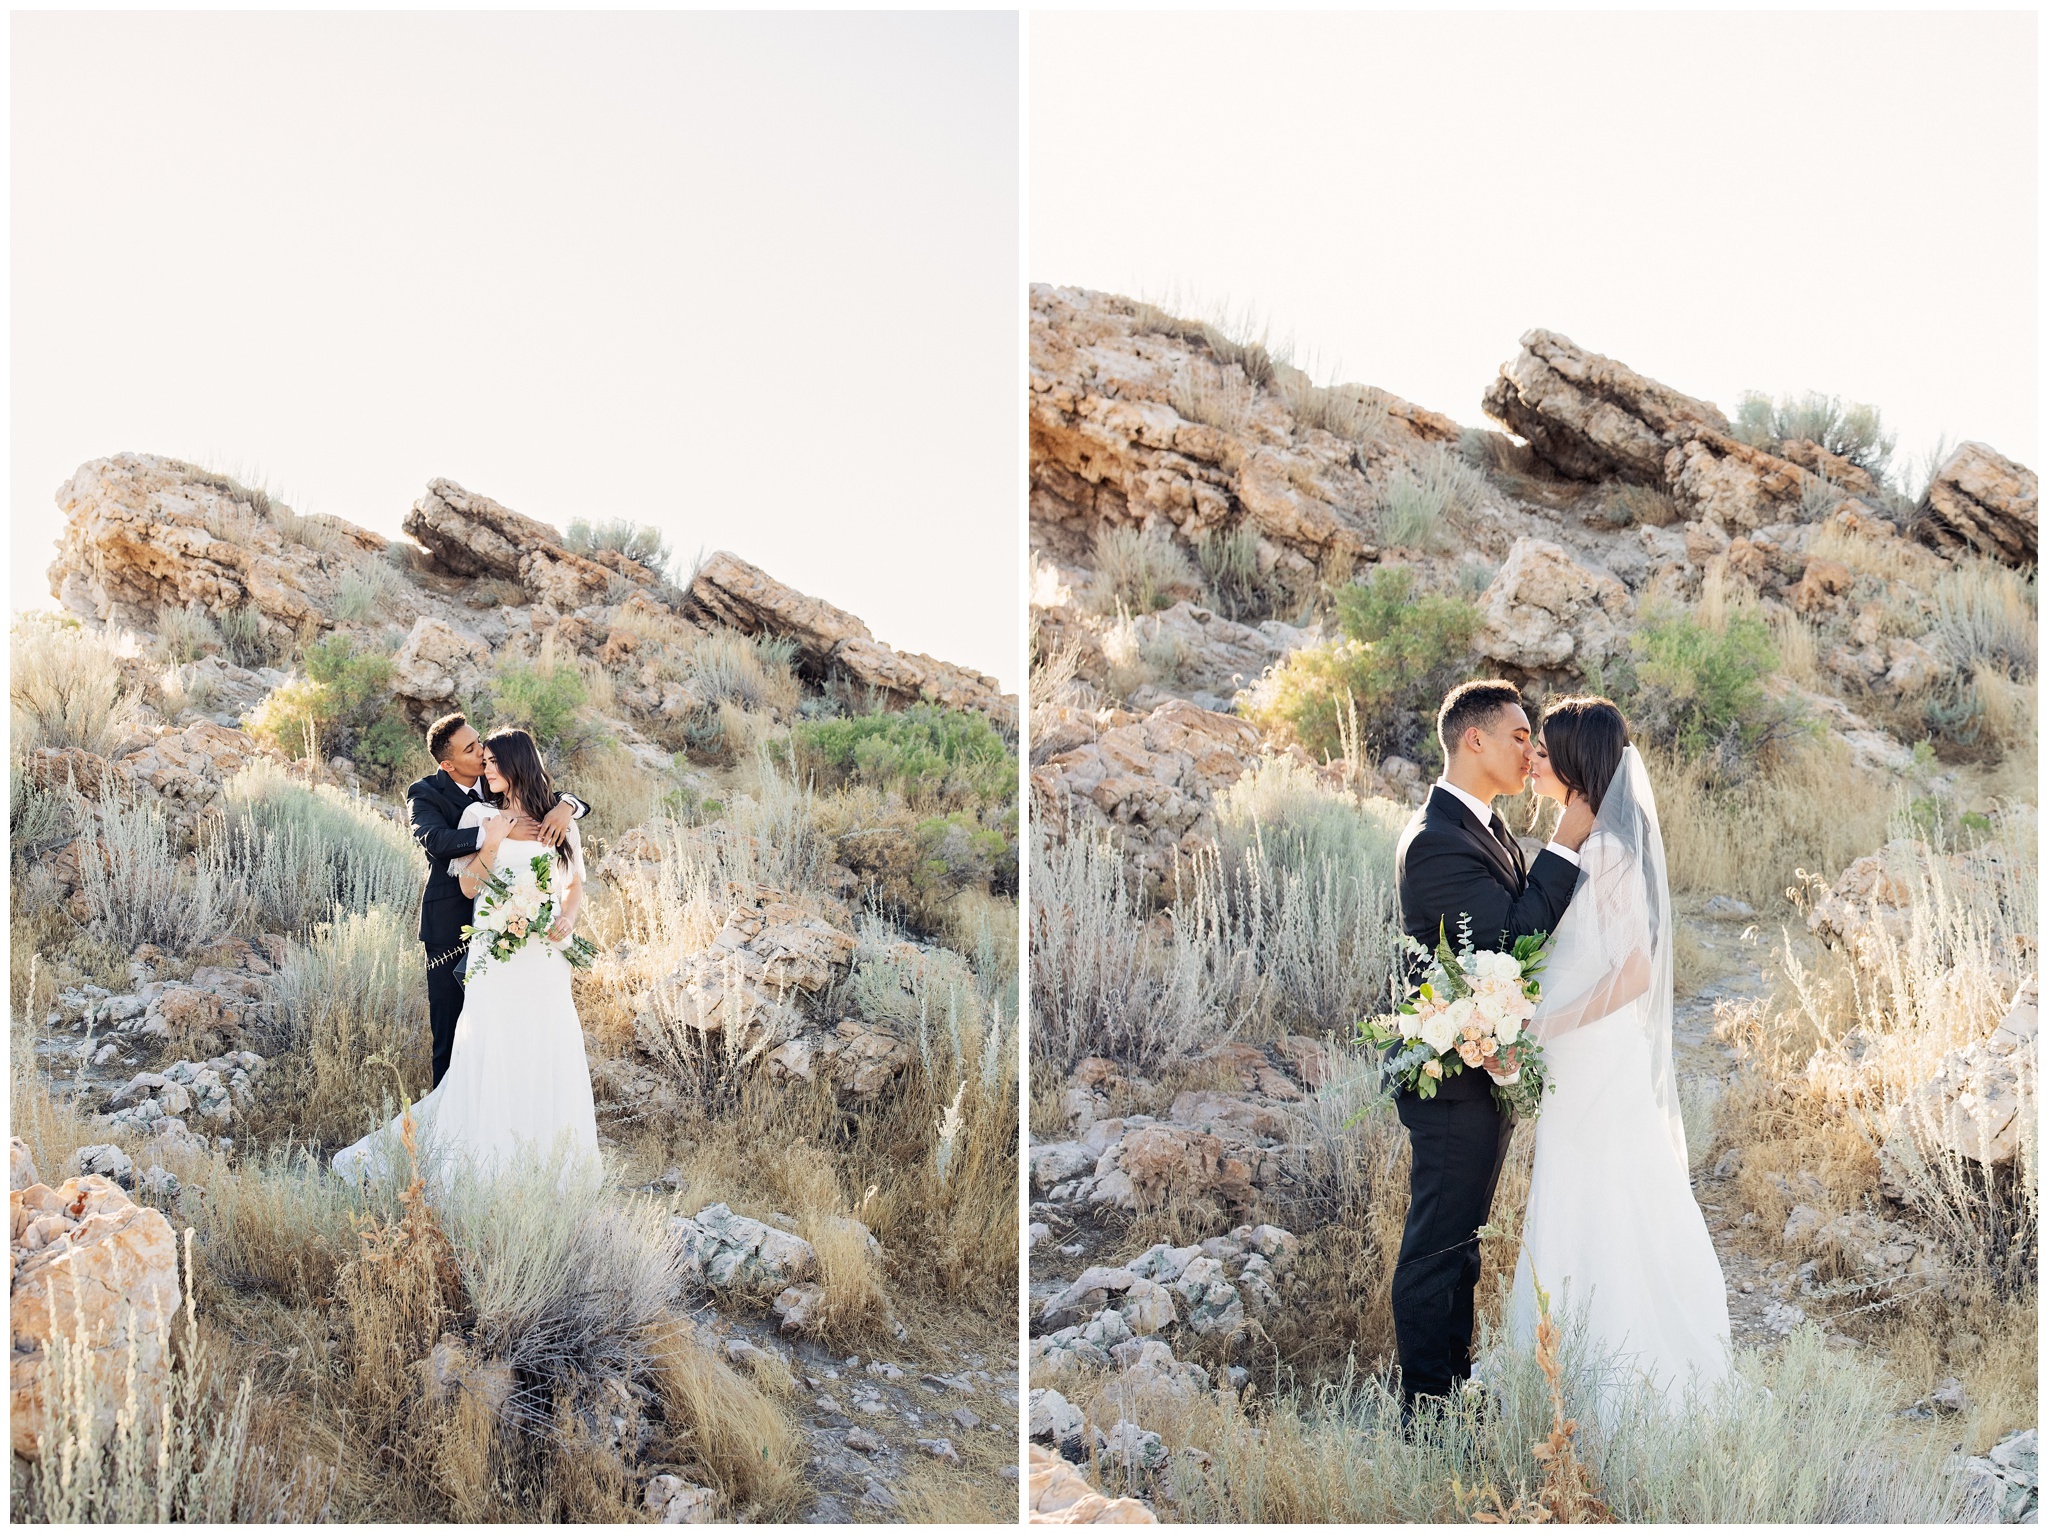 Bride and groom pictures of them kissing near rocks at Antelope Island